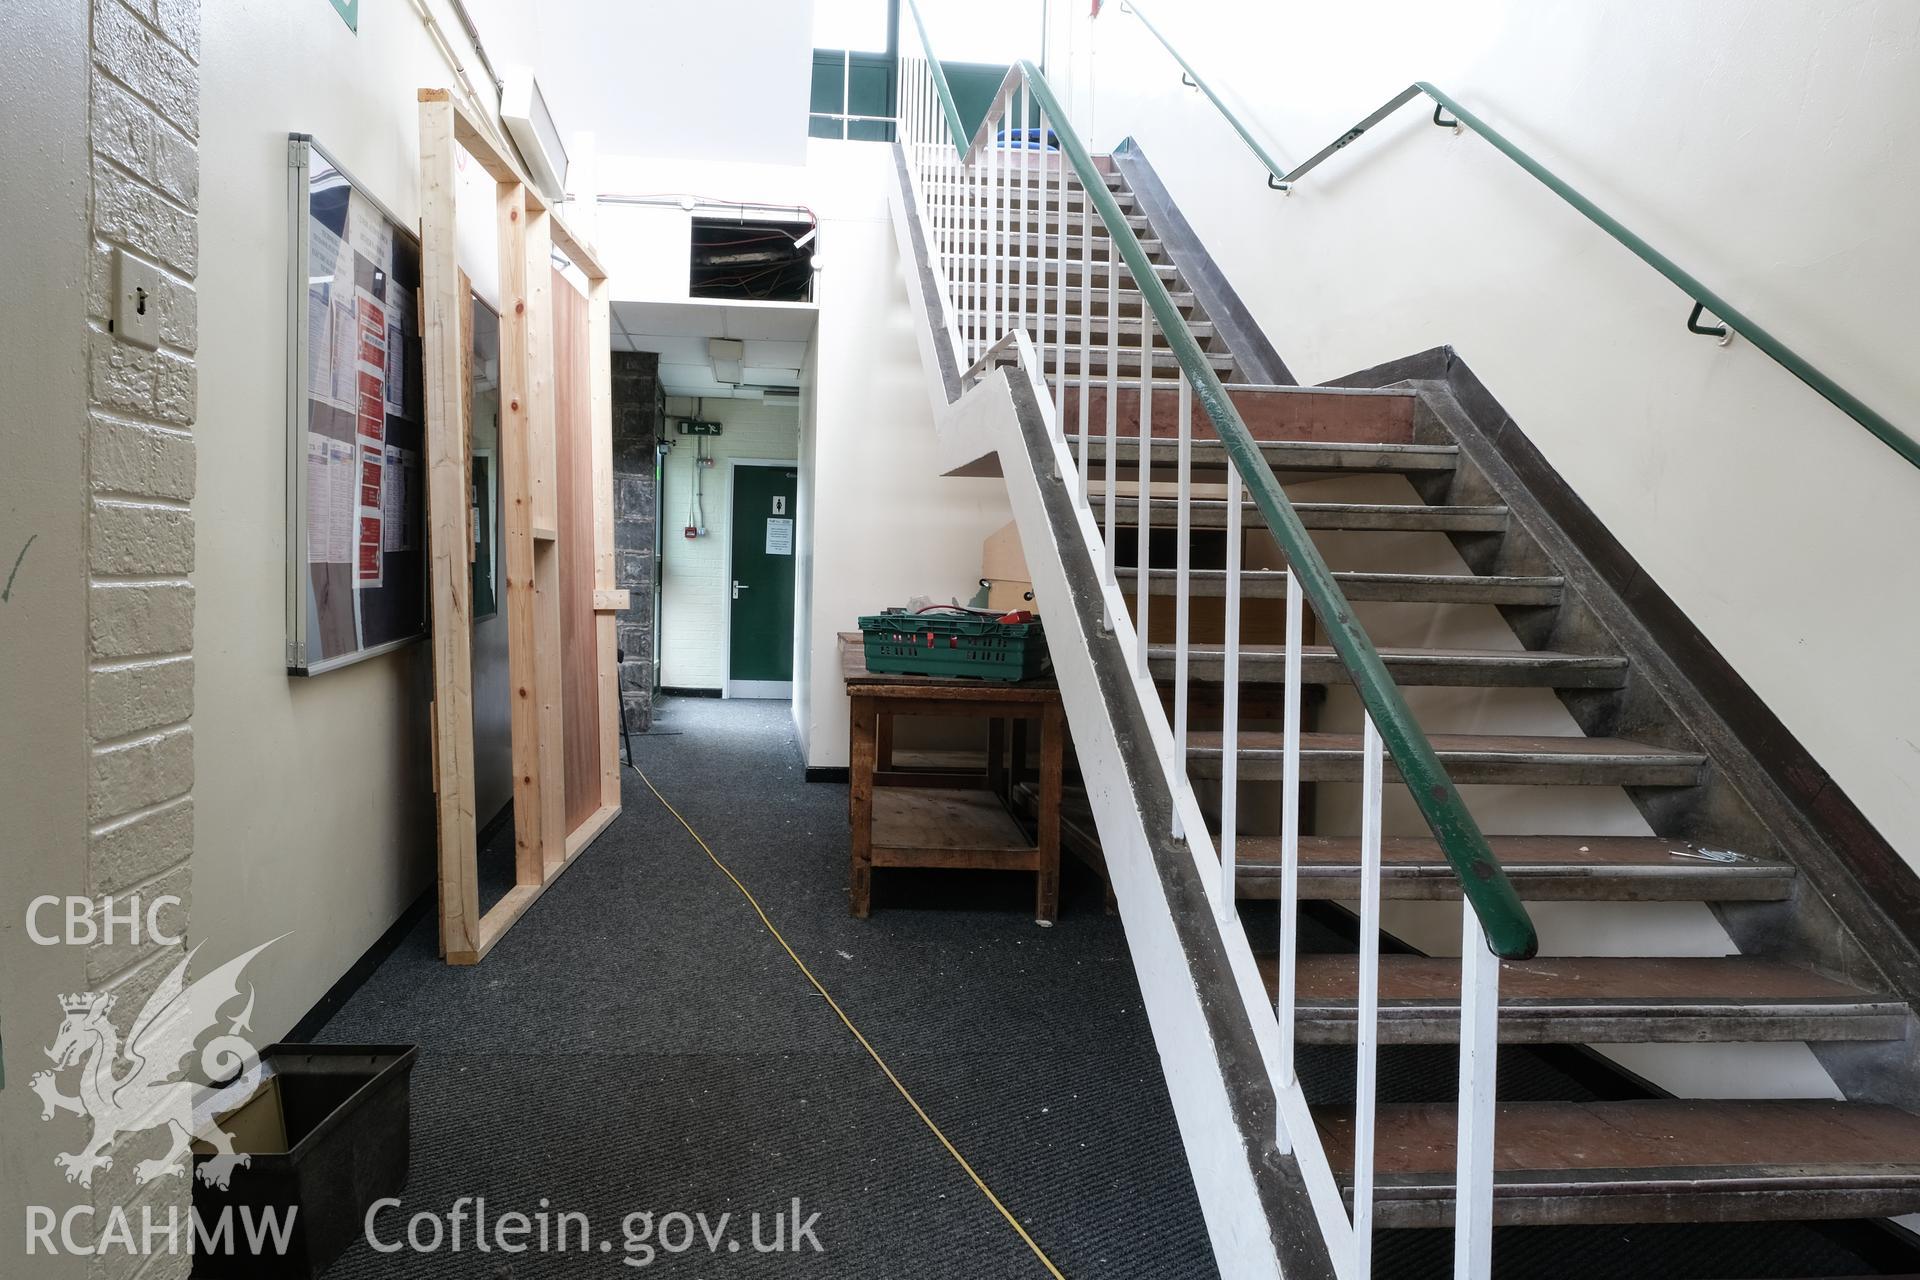 Digital colour photograph showing detailed interior view of hallway and stairs at Caernarfonshire Technical College, Ffriddoedd Road, Bangor. Photographed by Dilys Morgan and donated by Wyn Thomas of Grwp Llandrillo-Menai Further Education College, 2019.